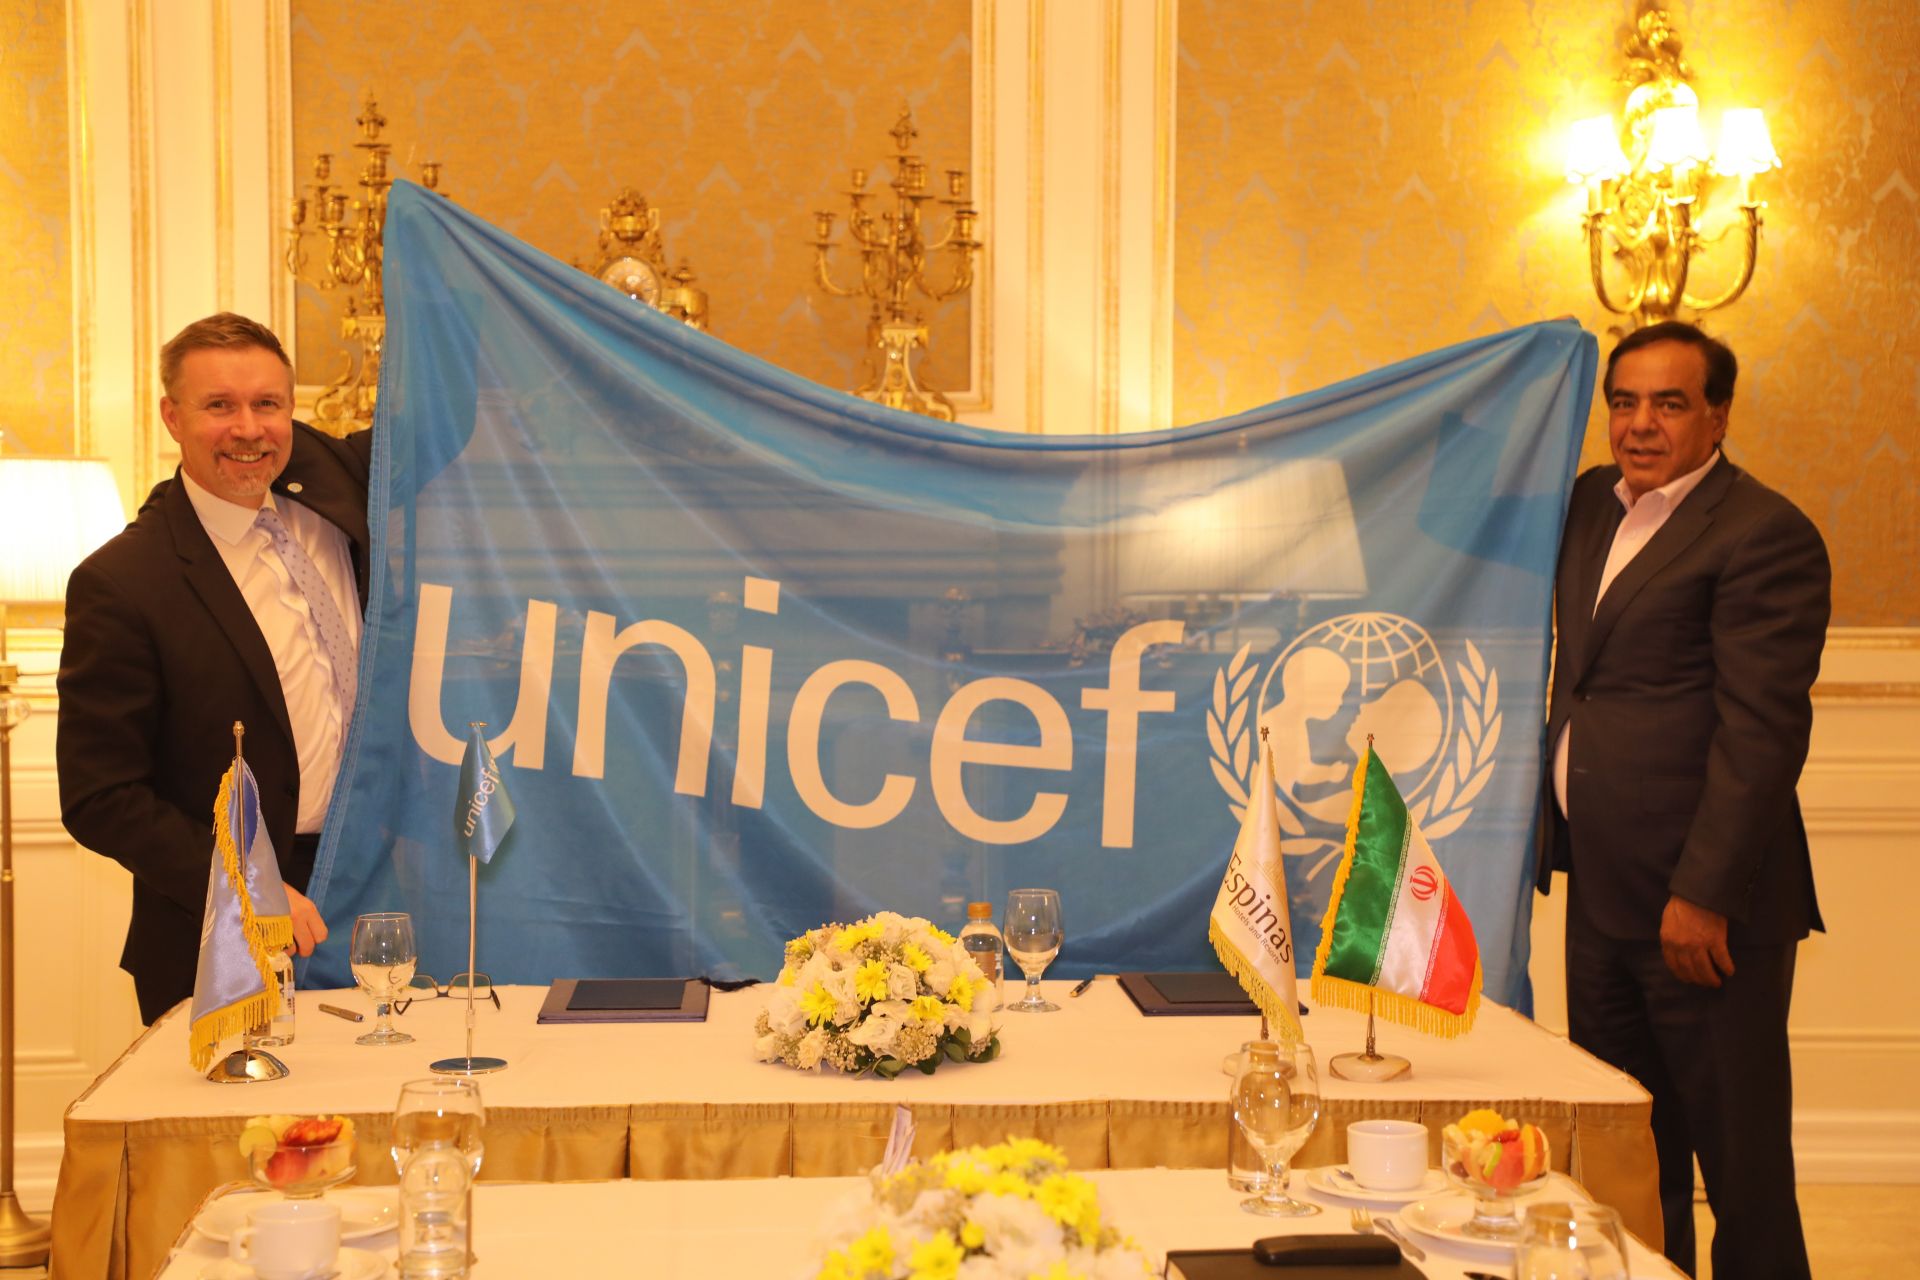 unicef-iran-and-espinas-hotels-group-announce-new-partnership